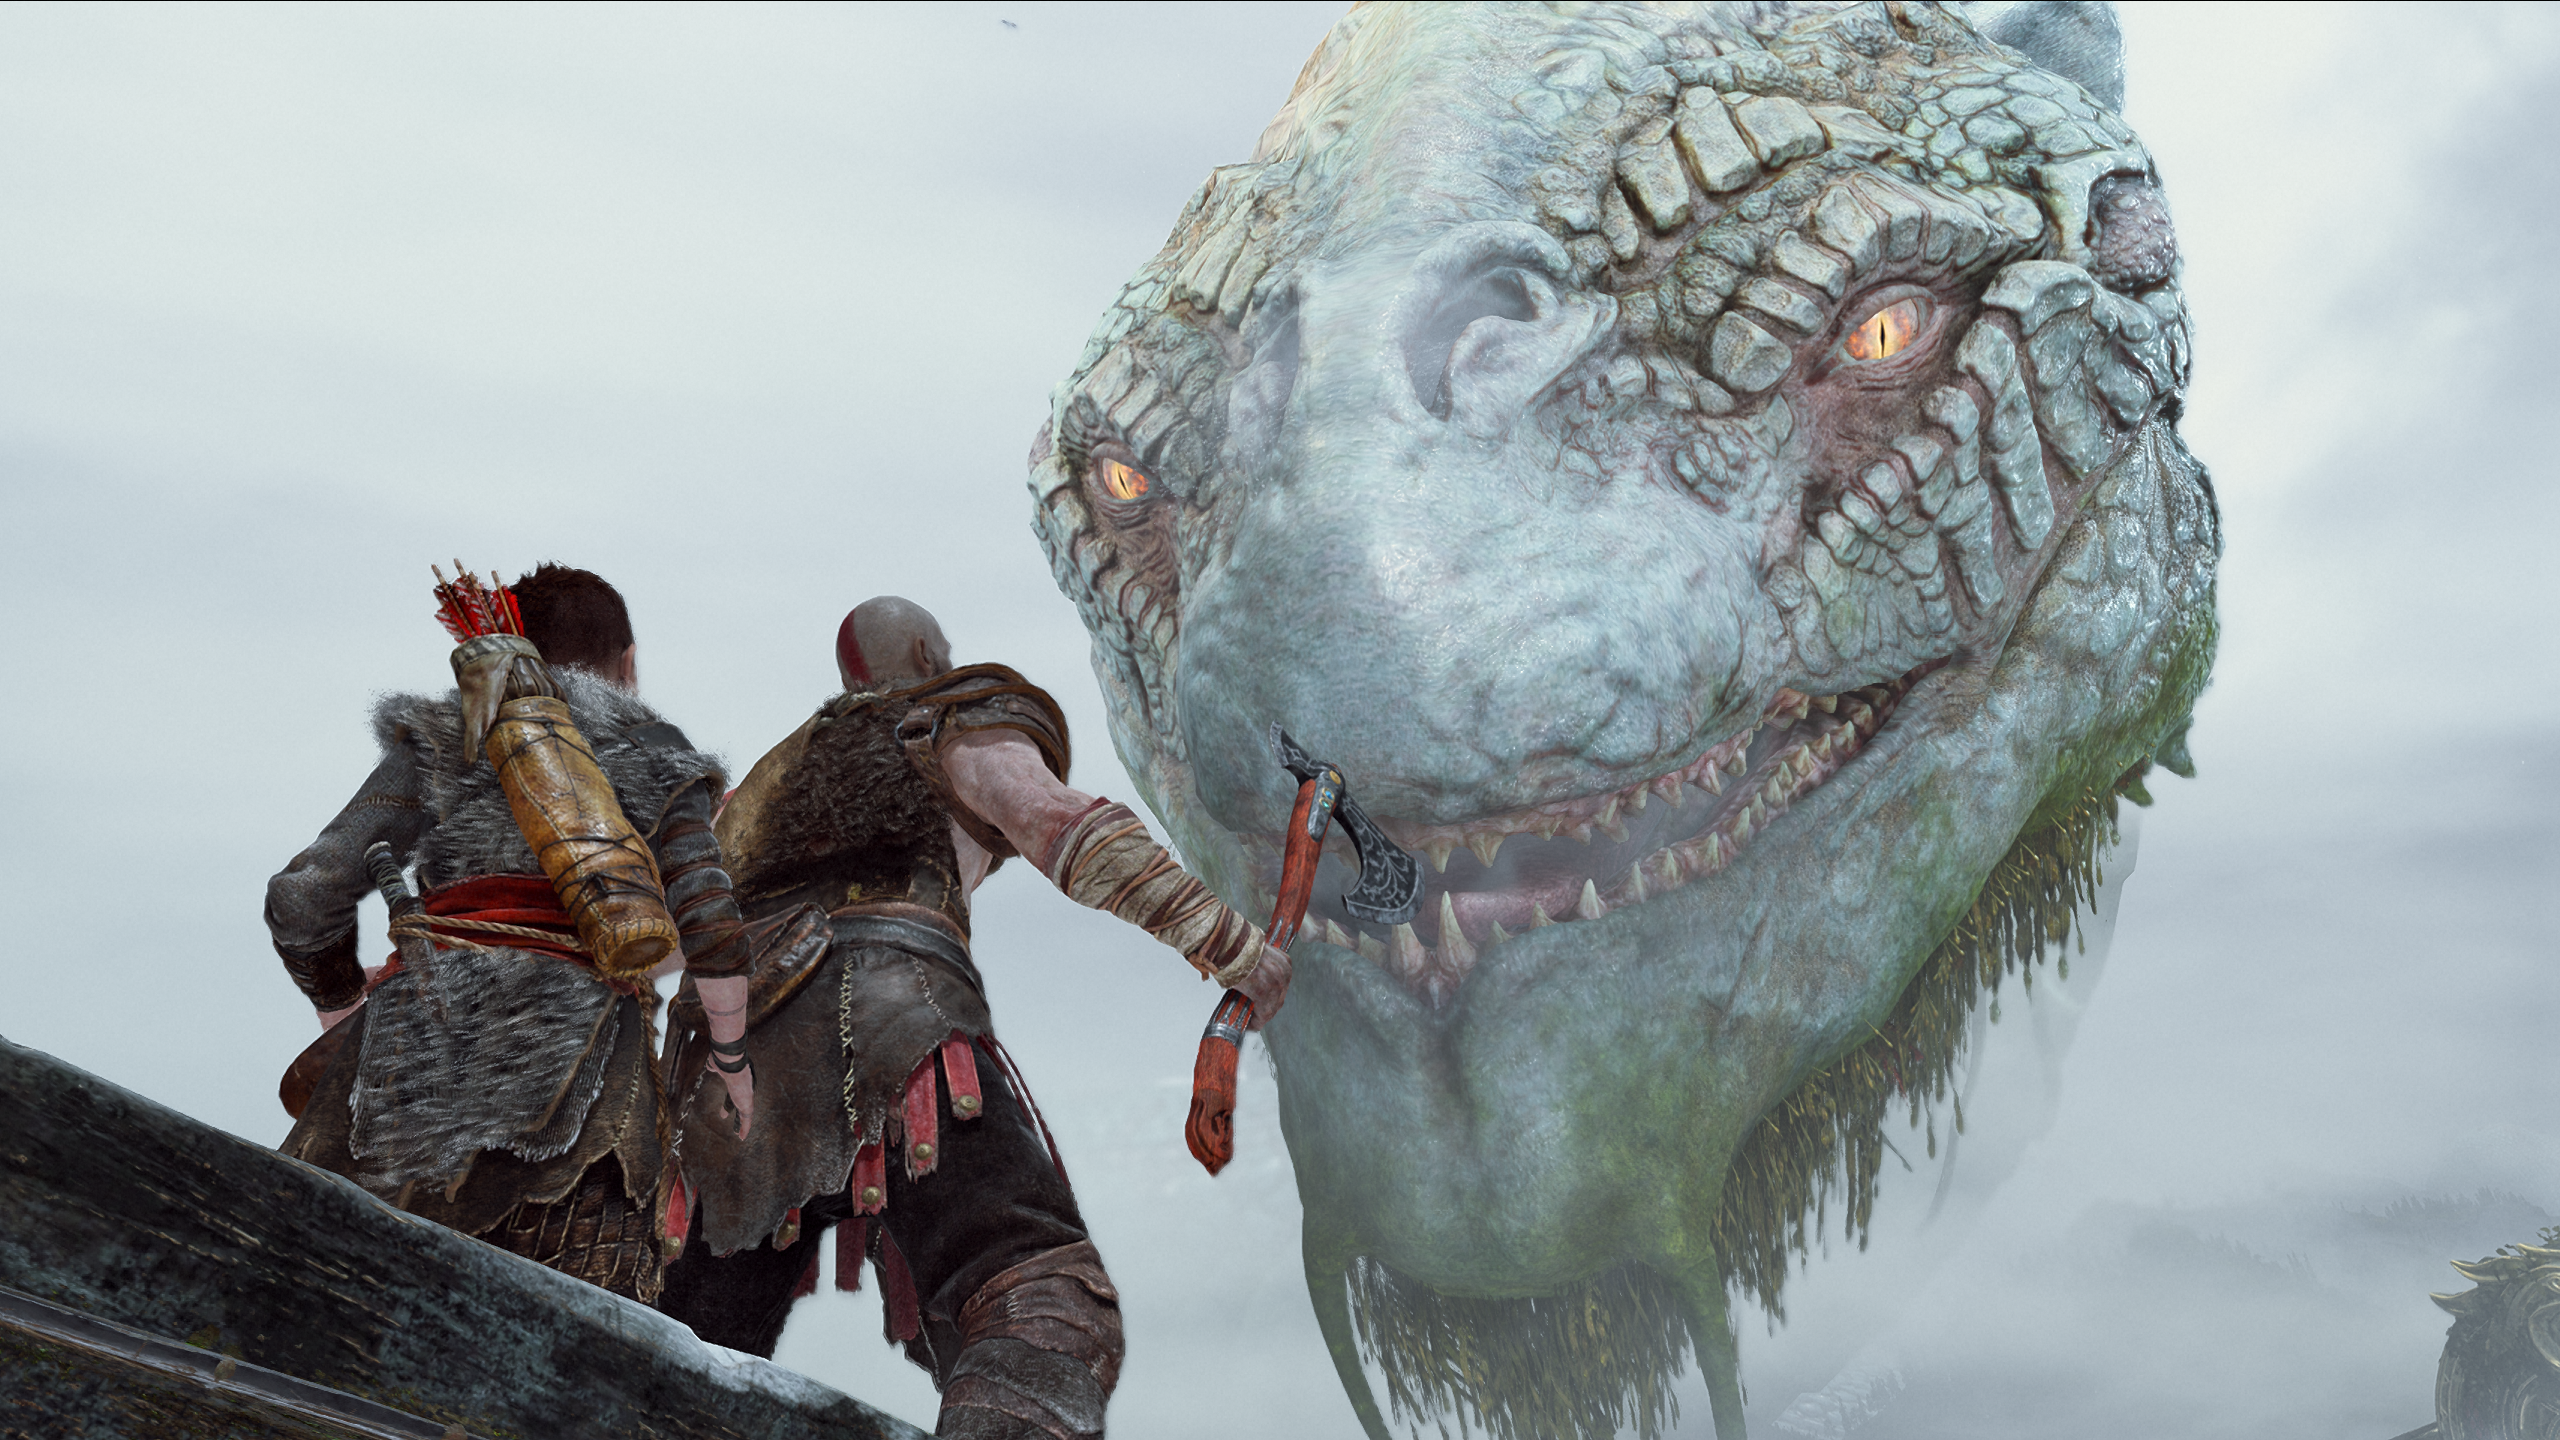 The World Serpent speaks to Kratos and Atreus in a scene from God of War.